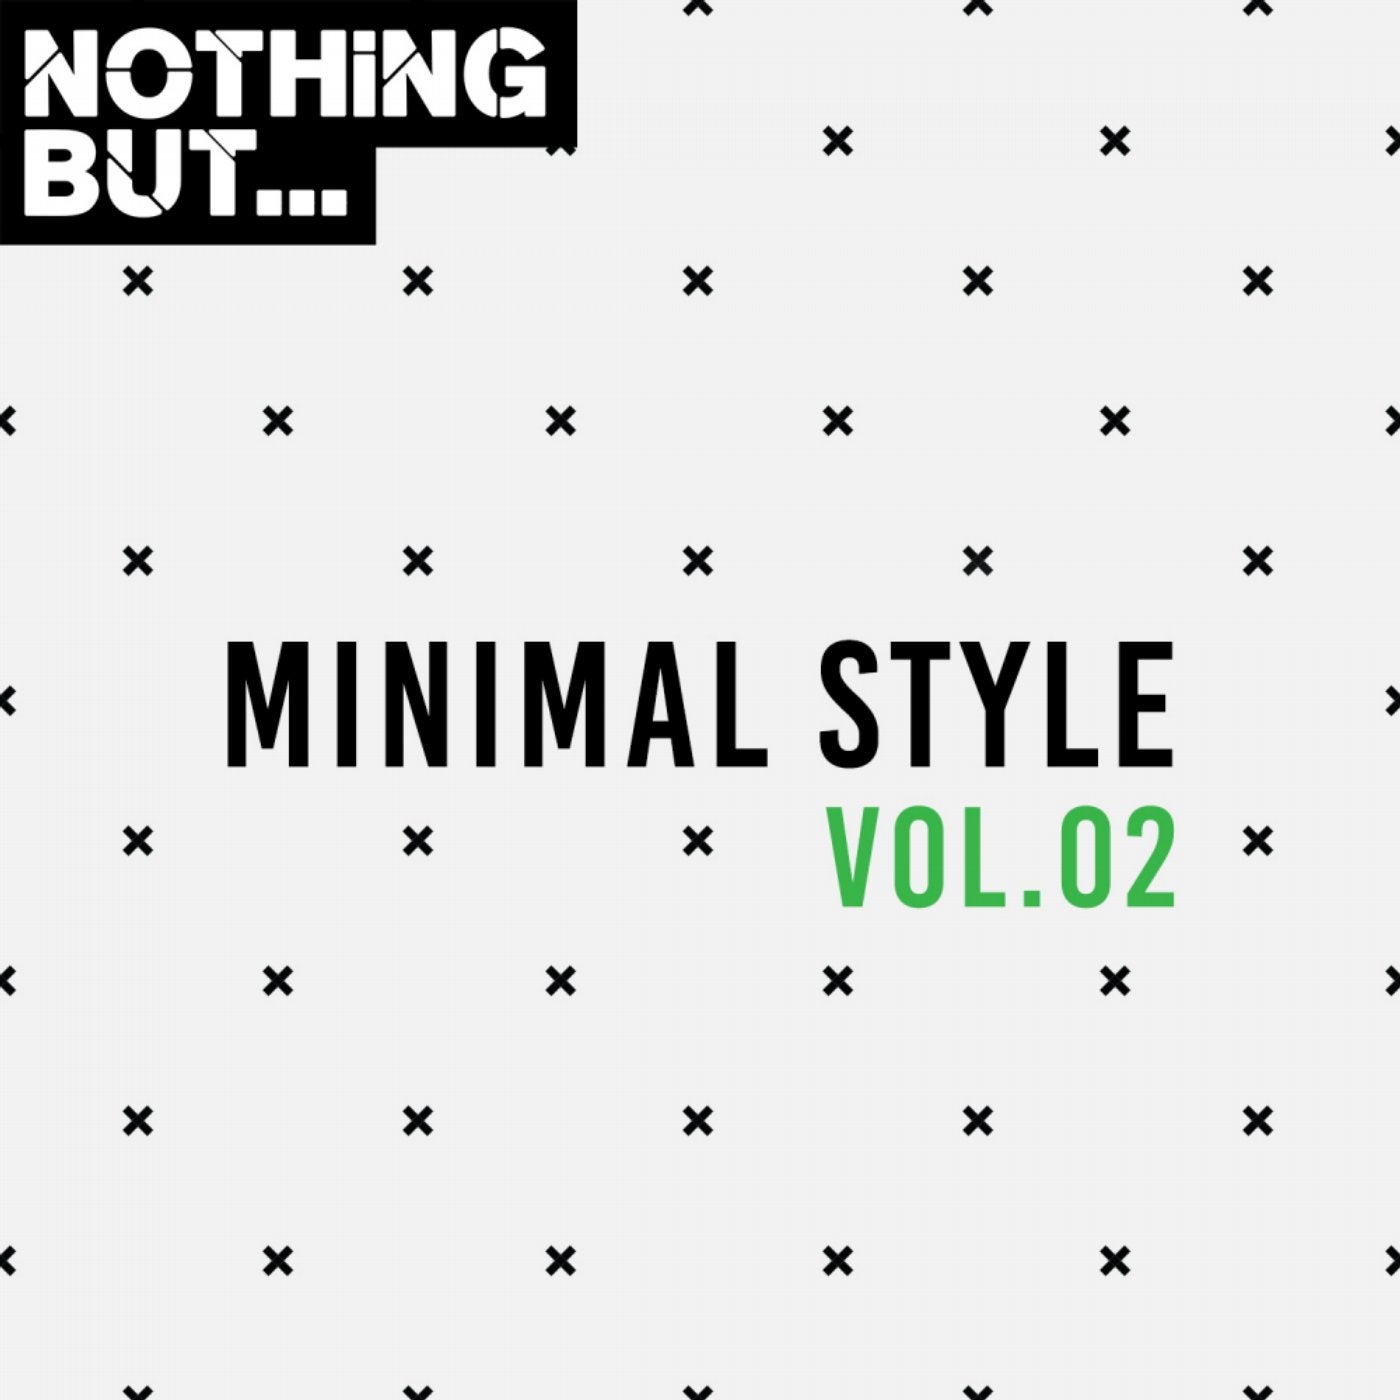 Nothing But... Minimal Style, Vol. 02